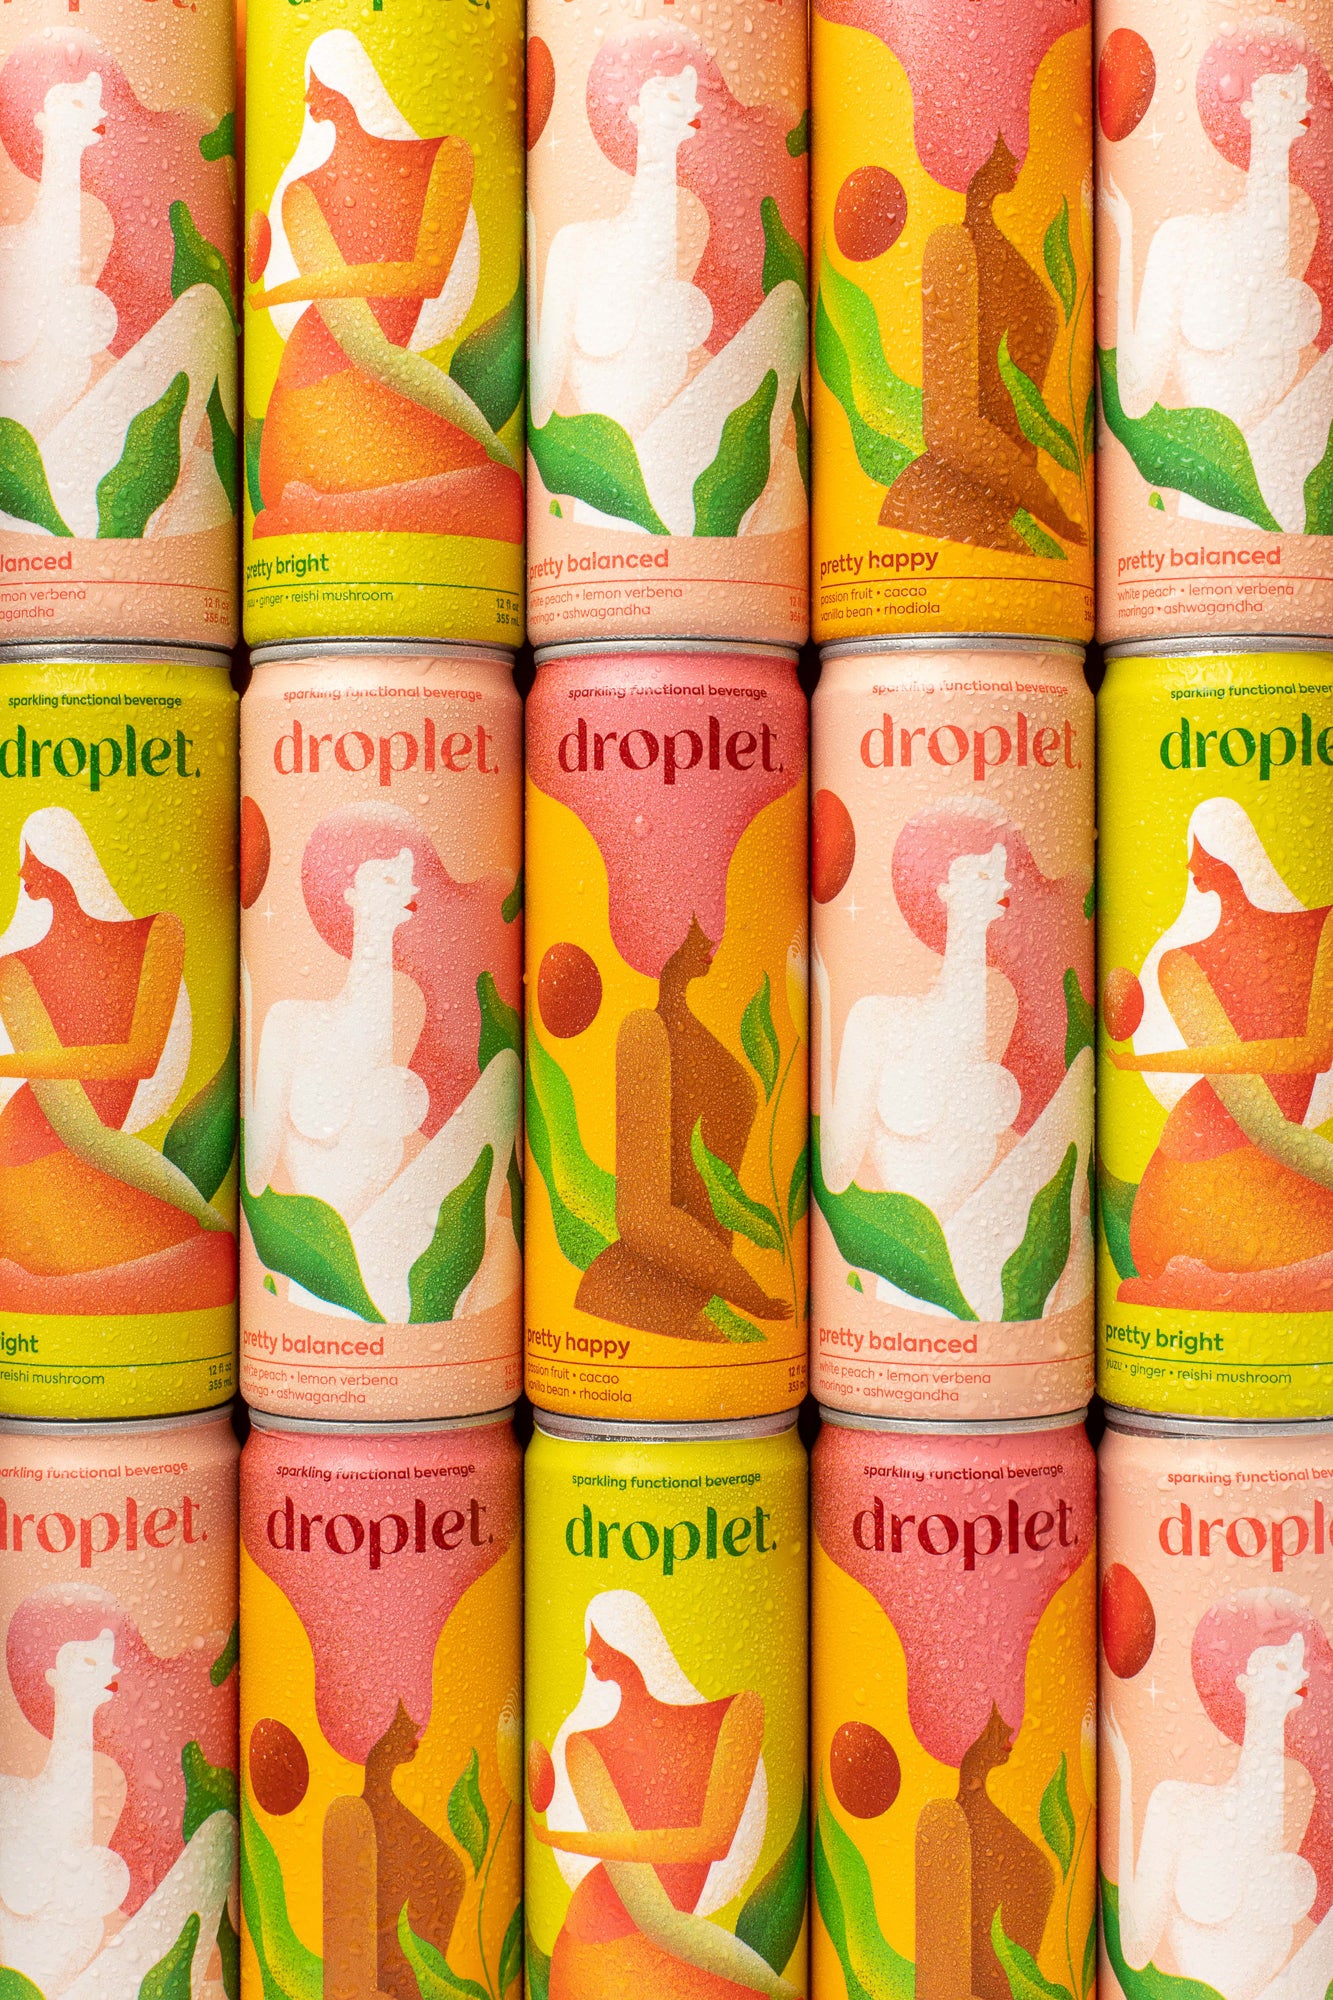 https://shop.drinkdroplet.com/cdn/shop/files/Droplet_Sparkling_Adaptogen_Drinks_-_self-care_in_every_sip_sparkling_carbonated_water_-_stacked_cans_with_artwork_by_Barbara_Malagoli_-_branding_by_Well_Fed_1920x.jpg?v=1632980743